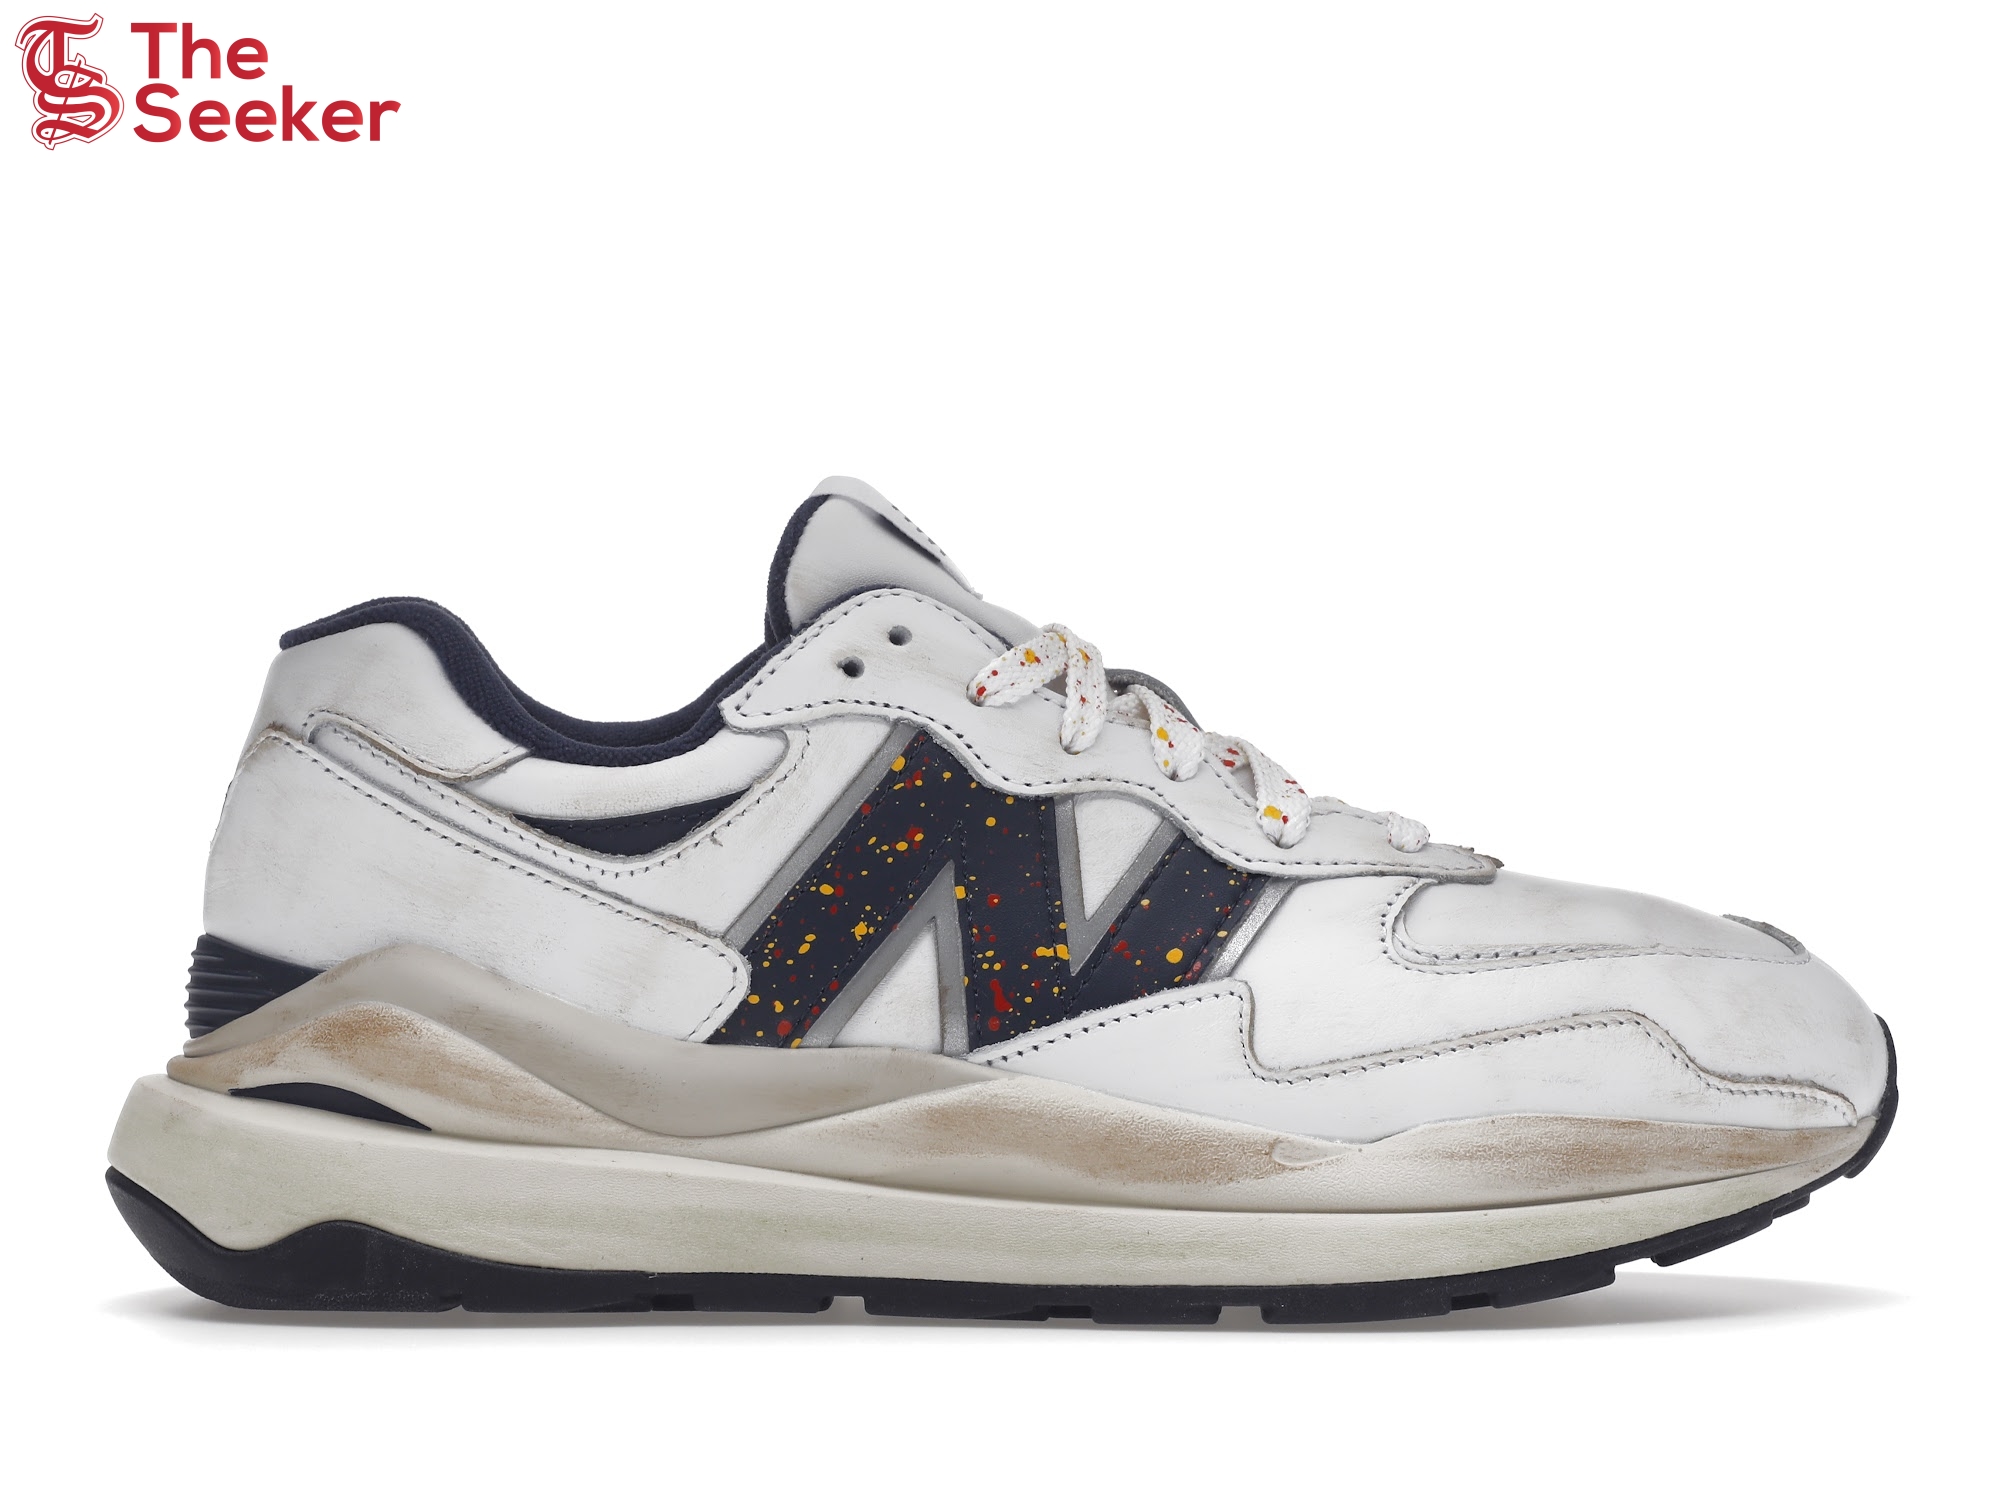 New Balance 57/40 Father's Day